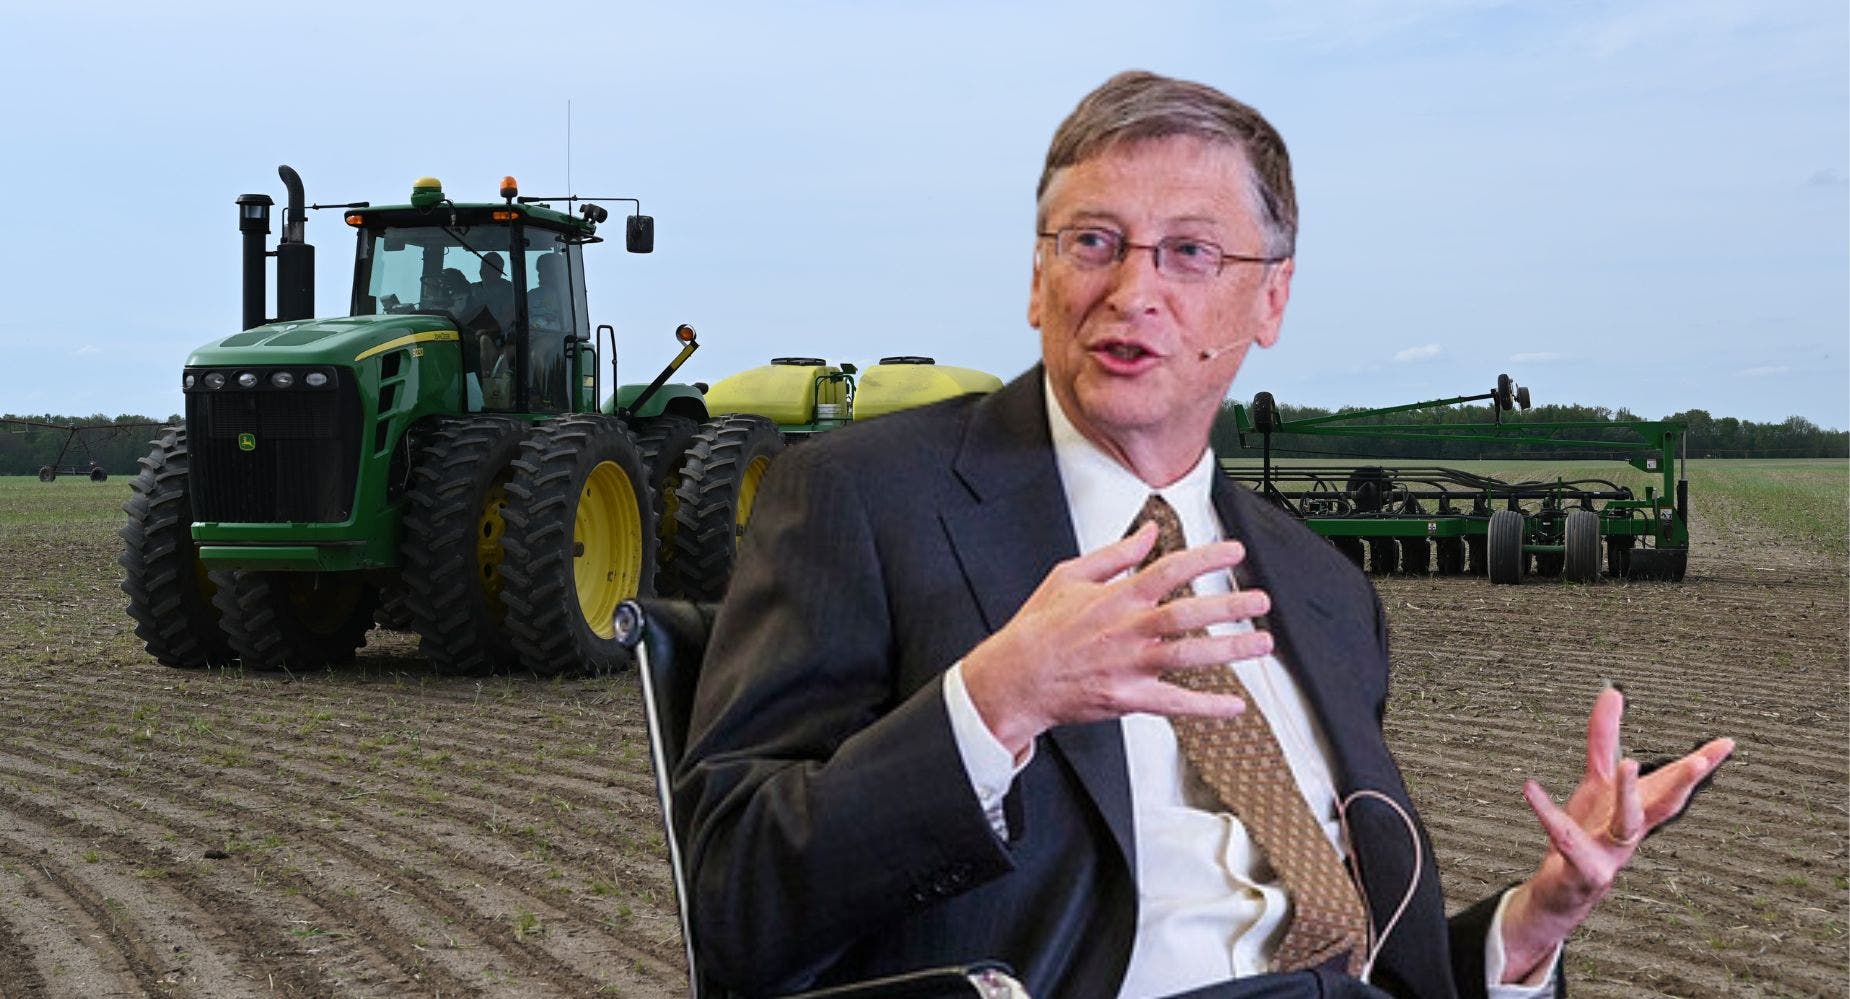 Can't Afford Farmland? Here Are 2 Dividend Stocks Bill Gates Owns In The Agriculture Industry